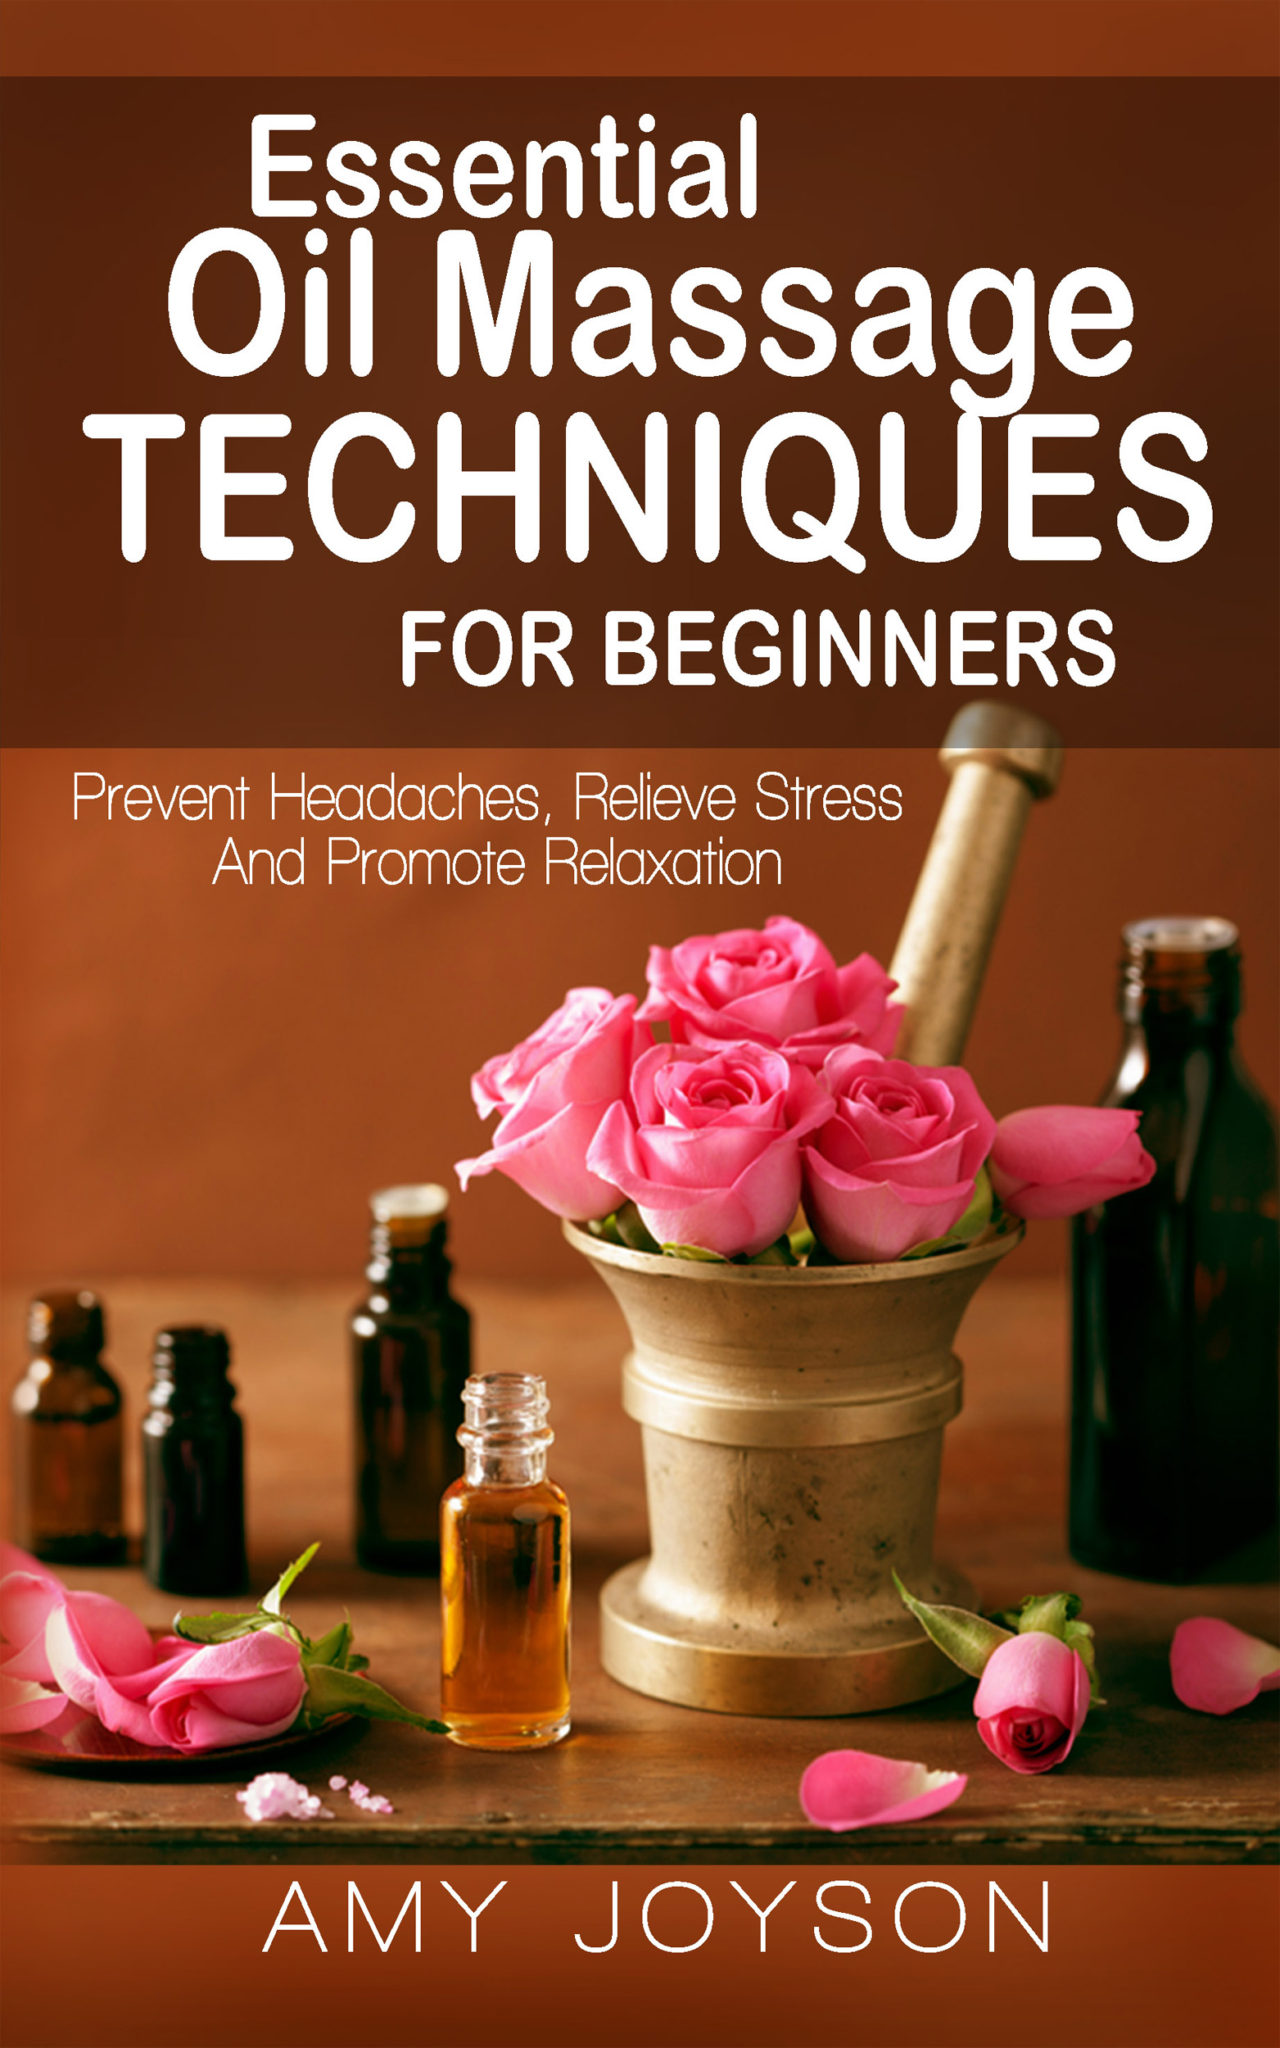 FREE: Essential Oils Massage: Massage Techniques For Beginners: Prevent Headaches, Relieve Stress And Promote Relaxation by Amy Joyson